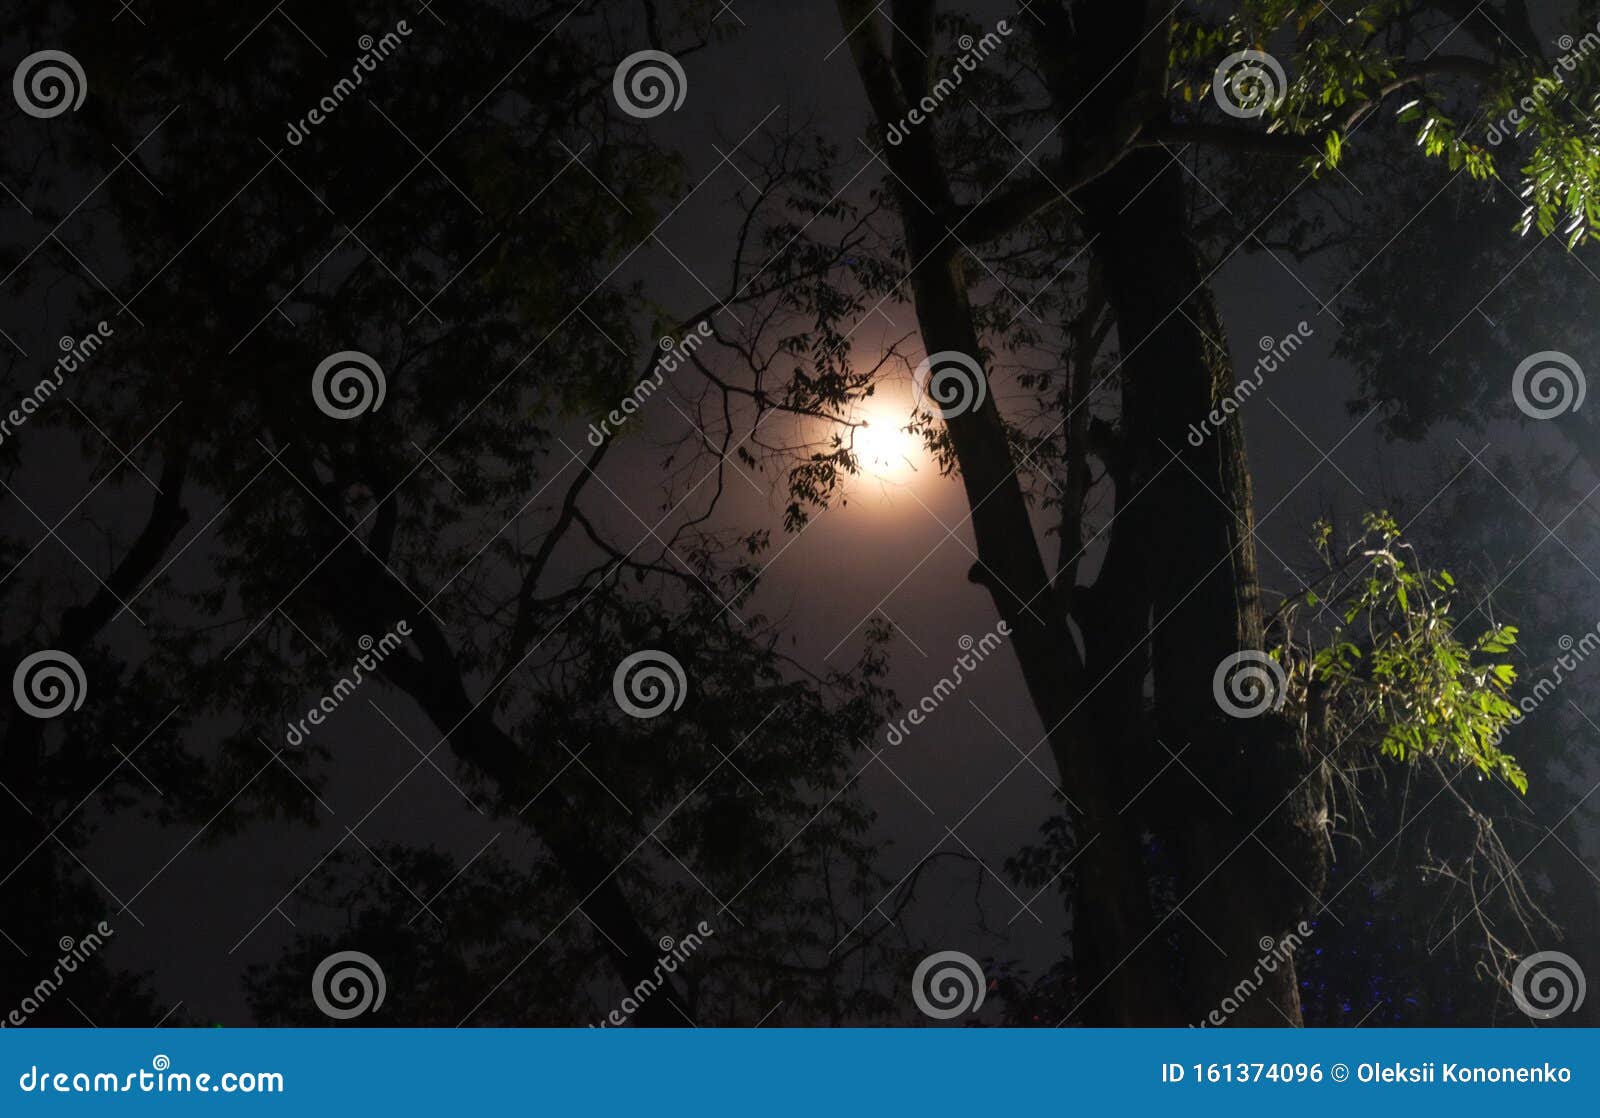 A Full Moon Emits Light in the Night Sky. Moonlight Shines through the